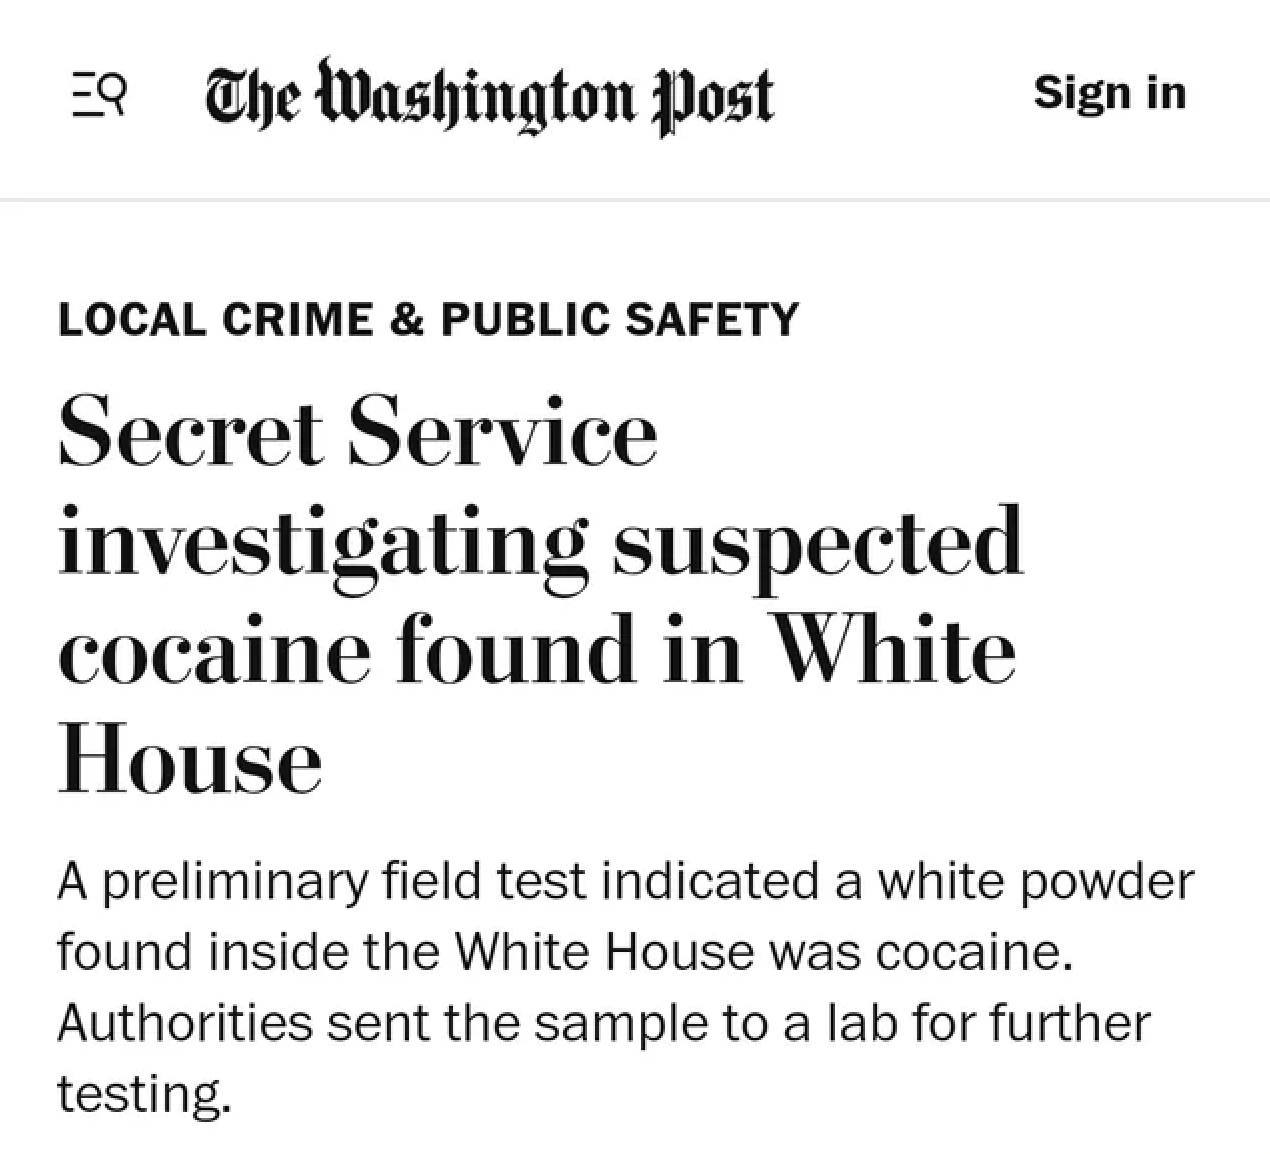 business writing passive voice - Q The Washington Post Local Crime & Public Safety Secret Service investigating suspected cocaine found in White House Sign in A preliminary field test indicated a white powder found inside the White House was cocaine. Auth